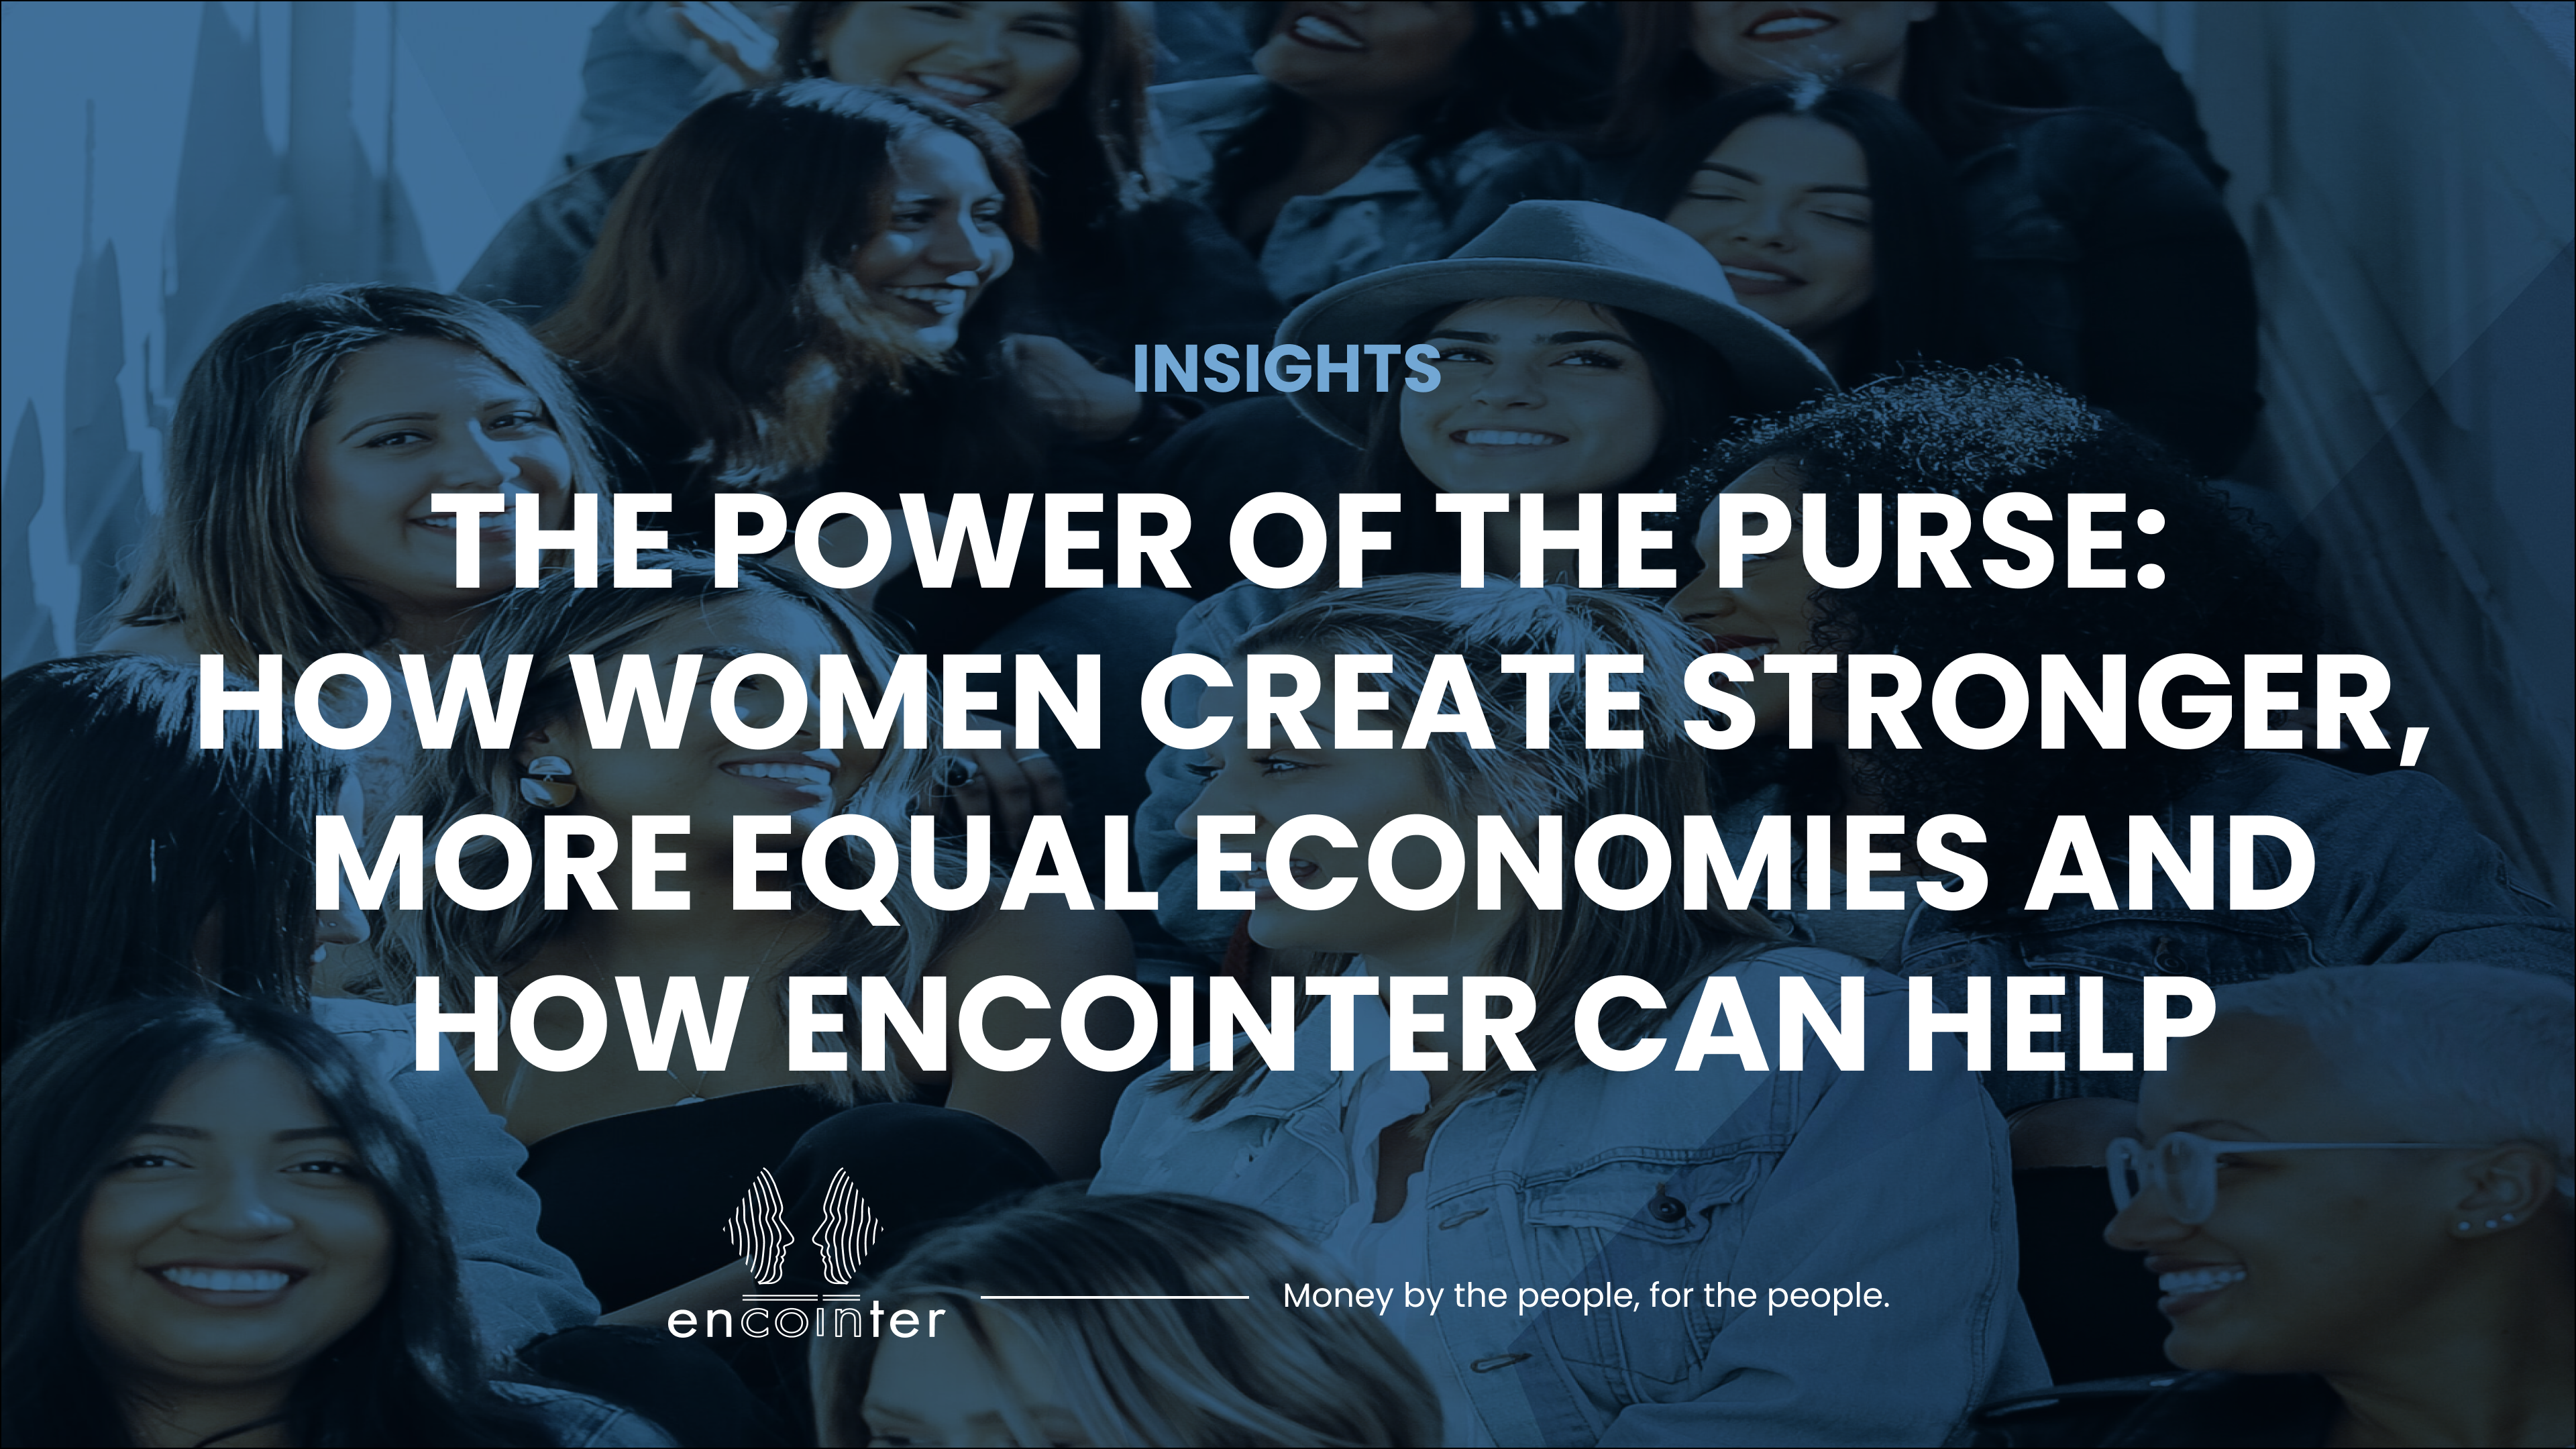 The power of the purse: how women create stronger, more equal economies and how Encointer can help